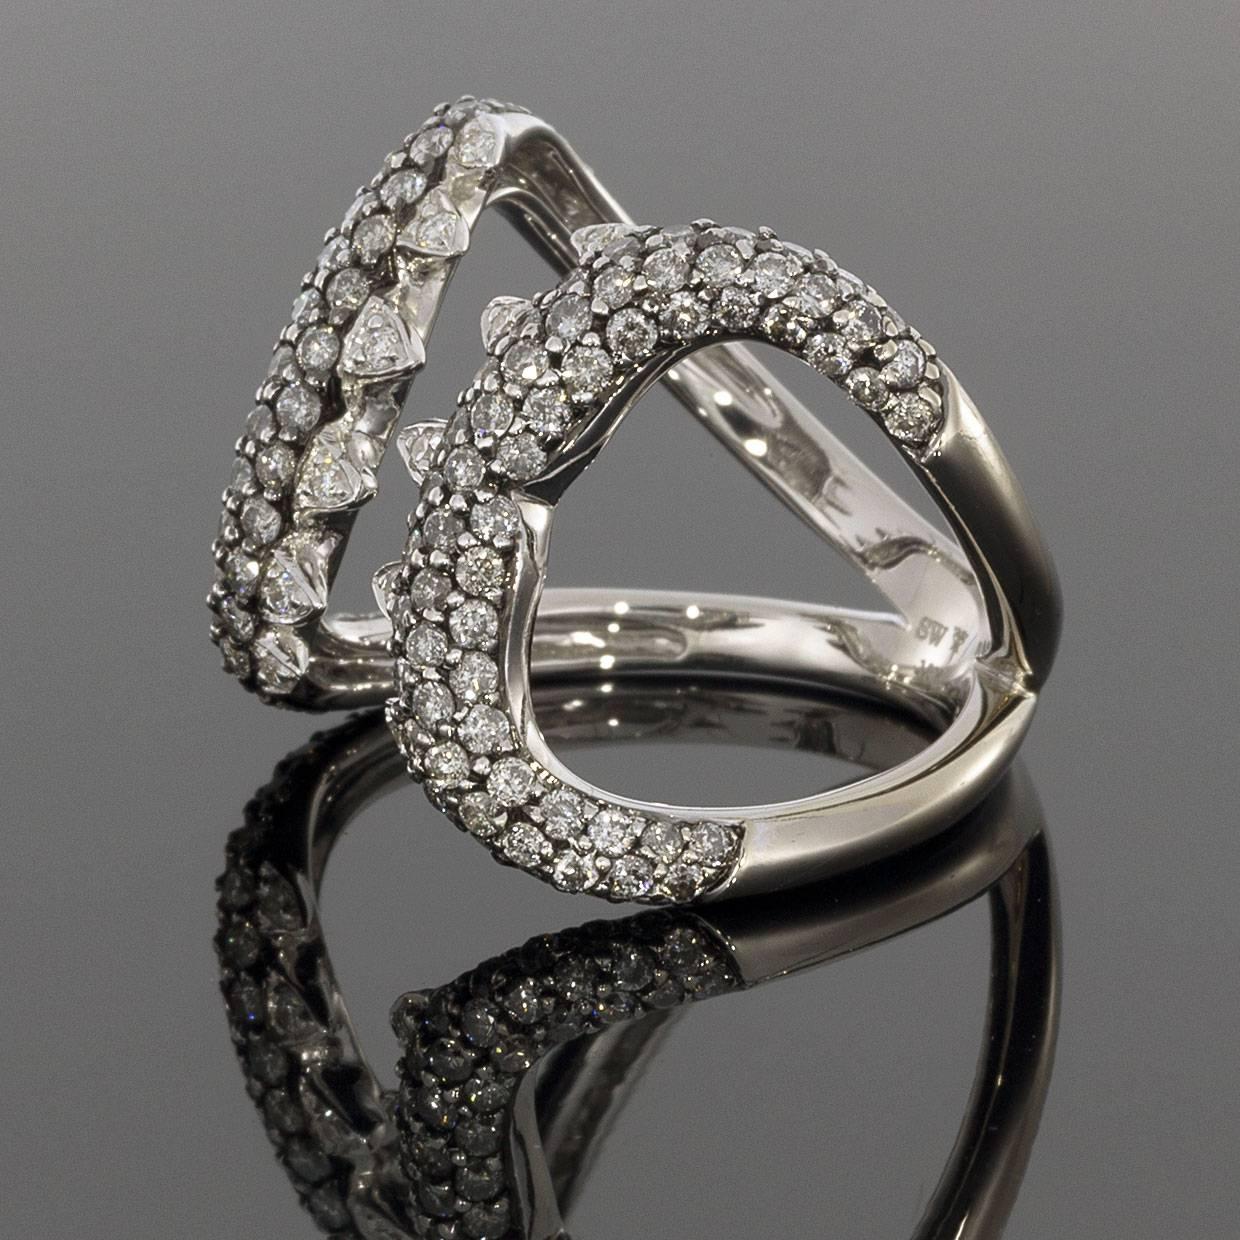 This gorgeous diamond fashion ring is sure to catch your eye from every angle! The unique shark bite design hugs the finger in sparkling 18K white gold. It's from the Jewels Verne collection from British designer Stephen Webster. The stone is set